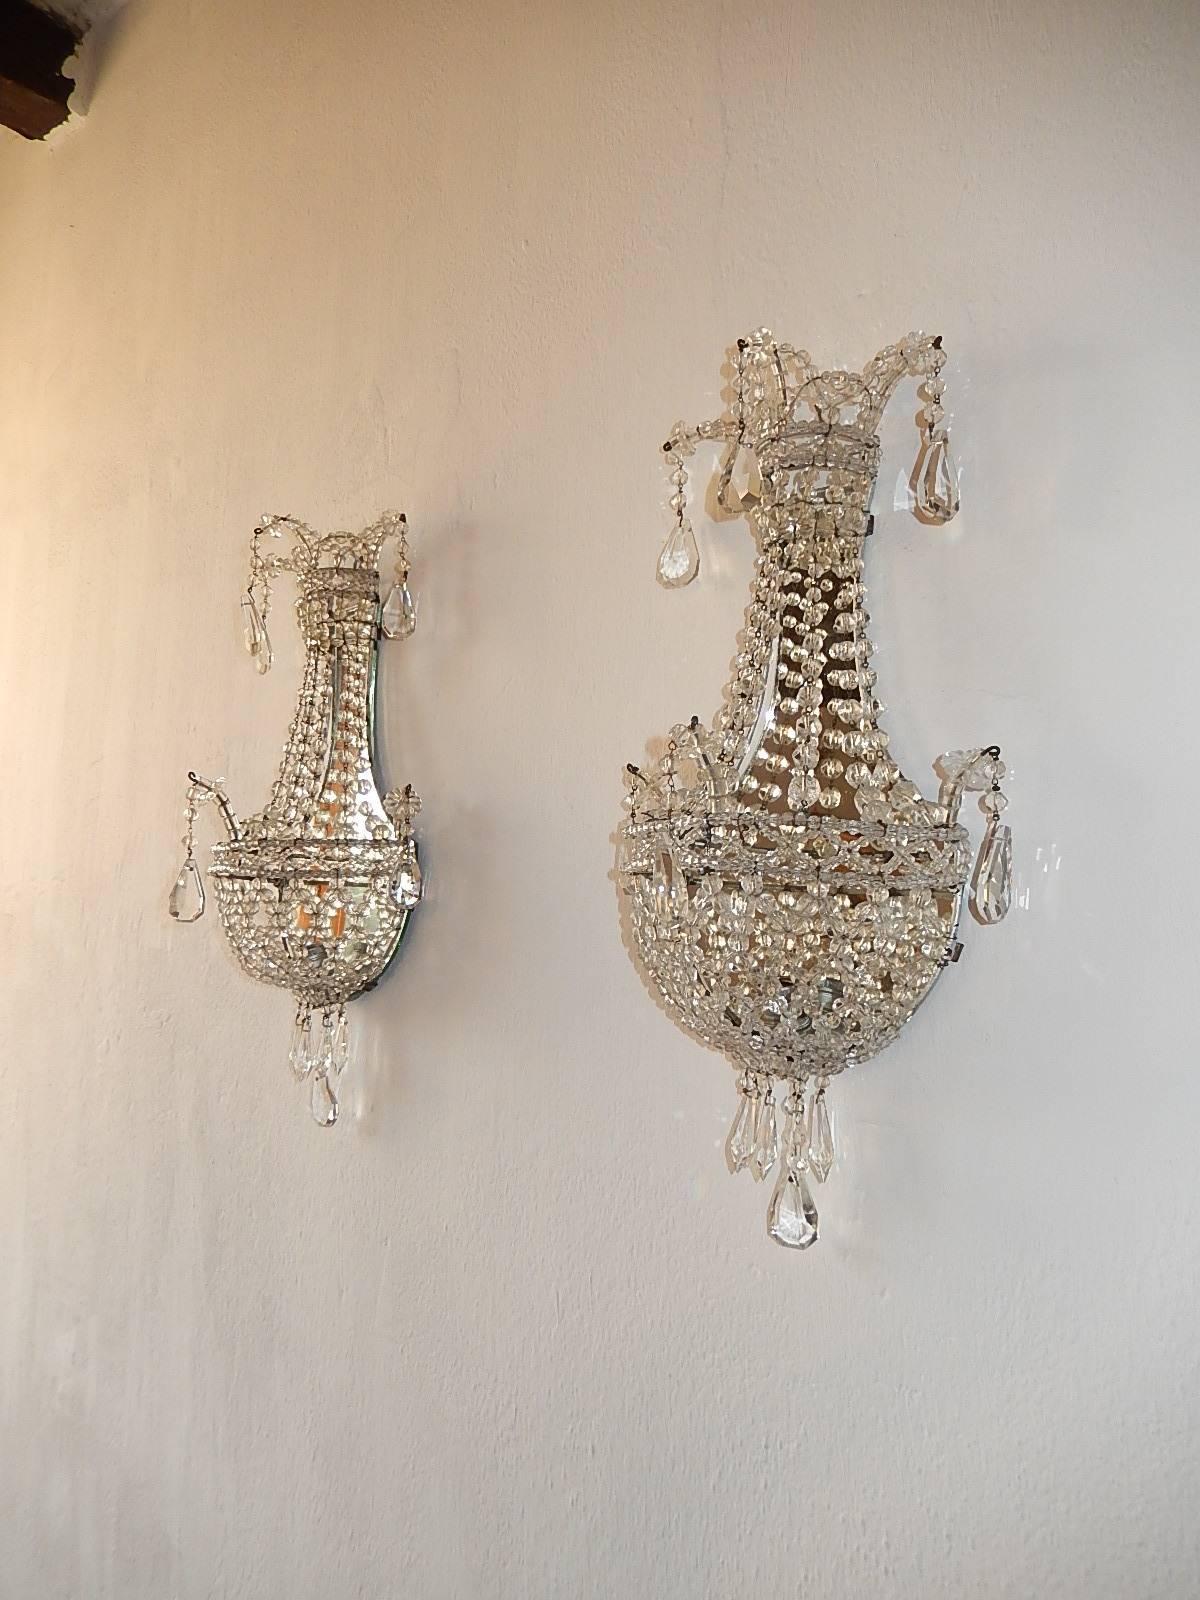 Housing one light each. Rewired and ready to hang. Completely beaded in crystal balls. Adorning crystal prisms. Mirrors on back in great shape. Free priority shipping from Italy.